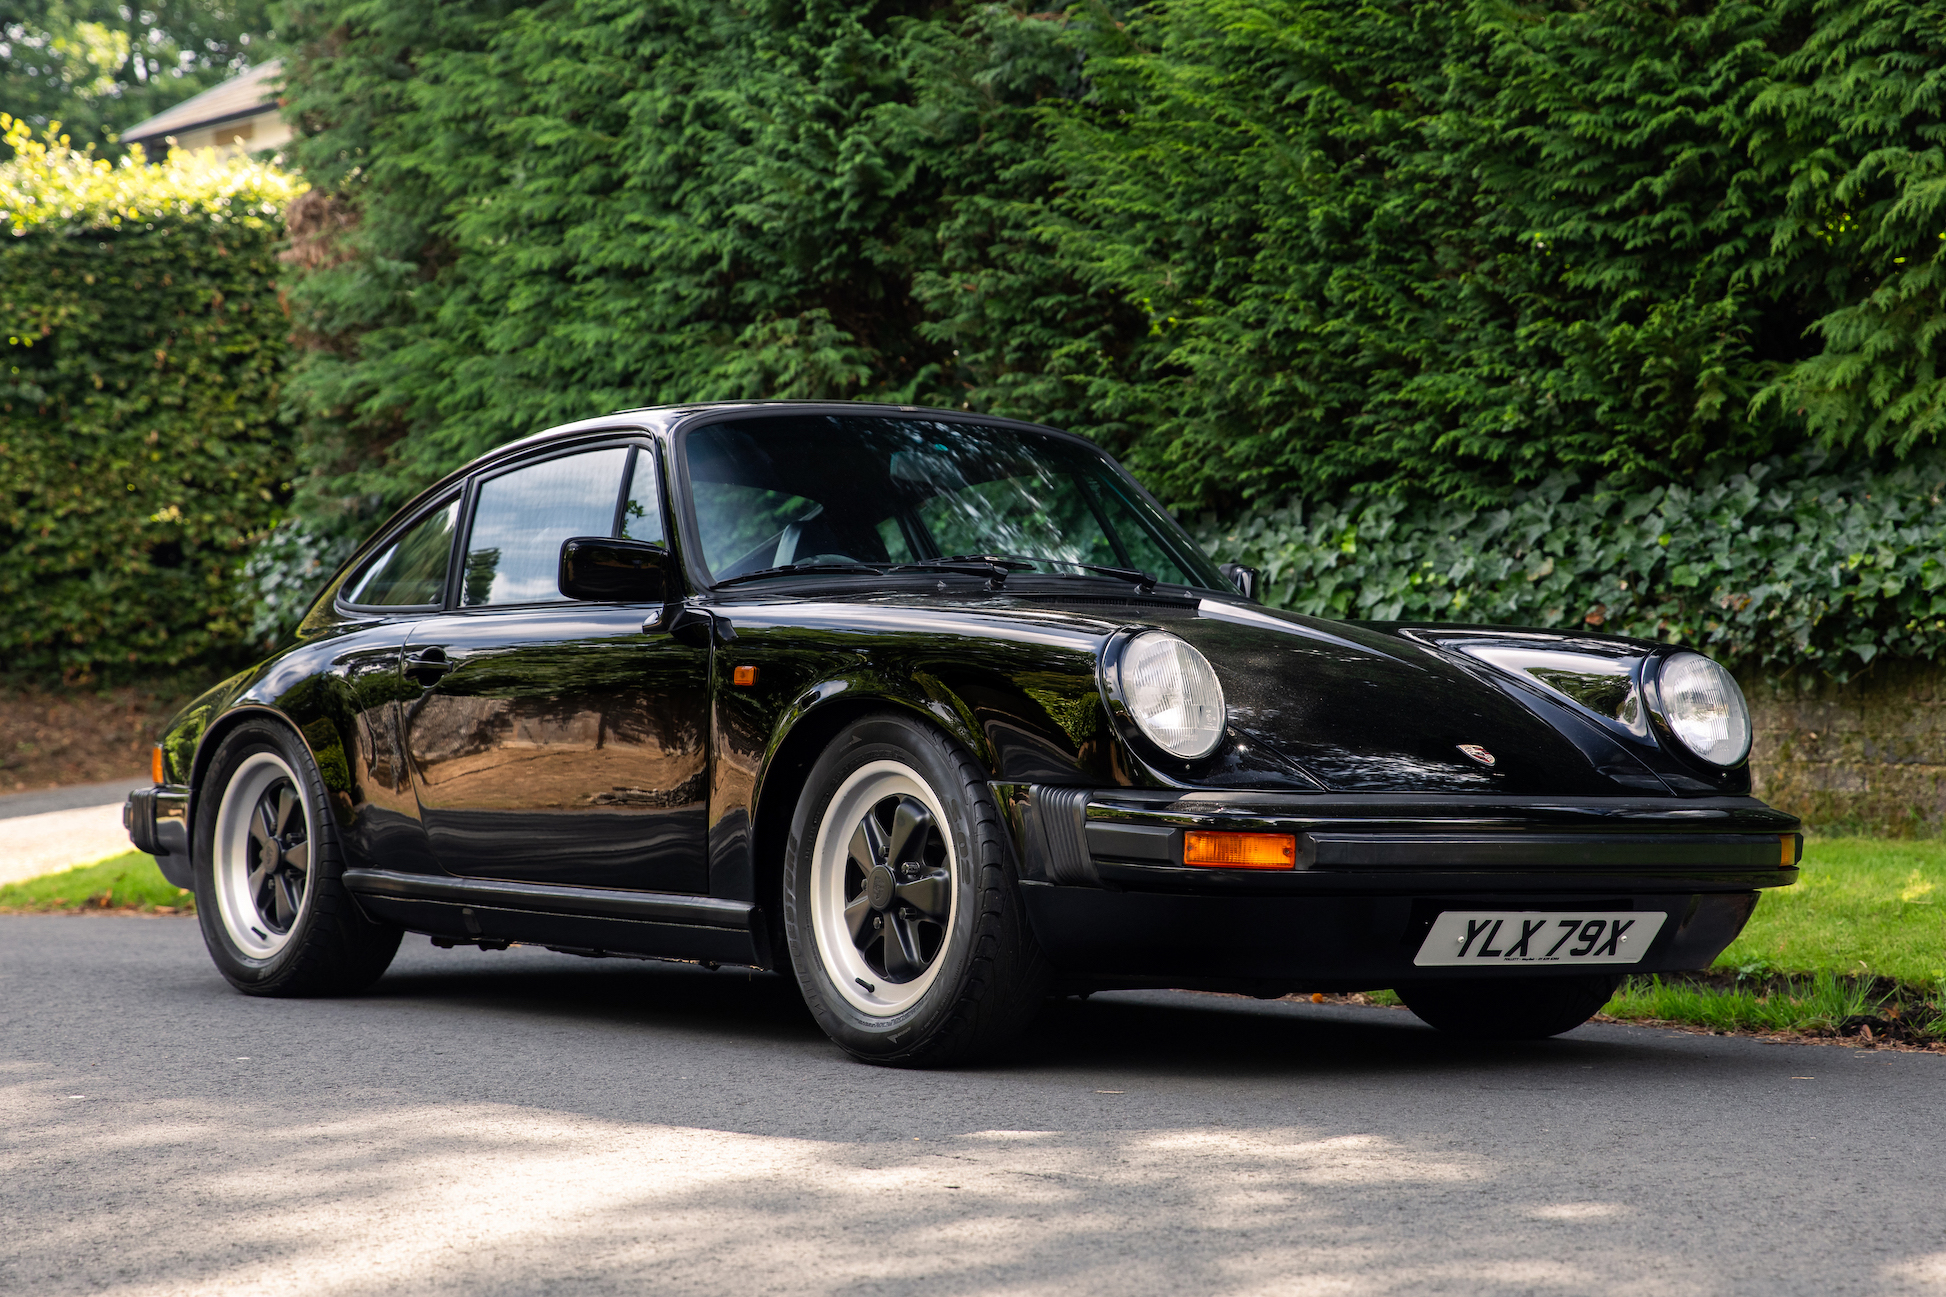 1981 PORSCHE 911 SC for sale by auction in Oxted, Surrey, United Kingdom